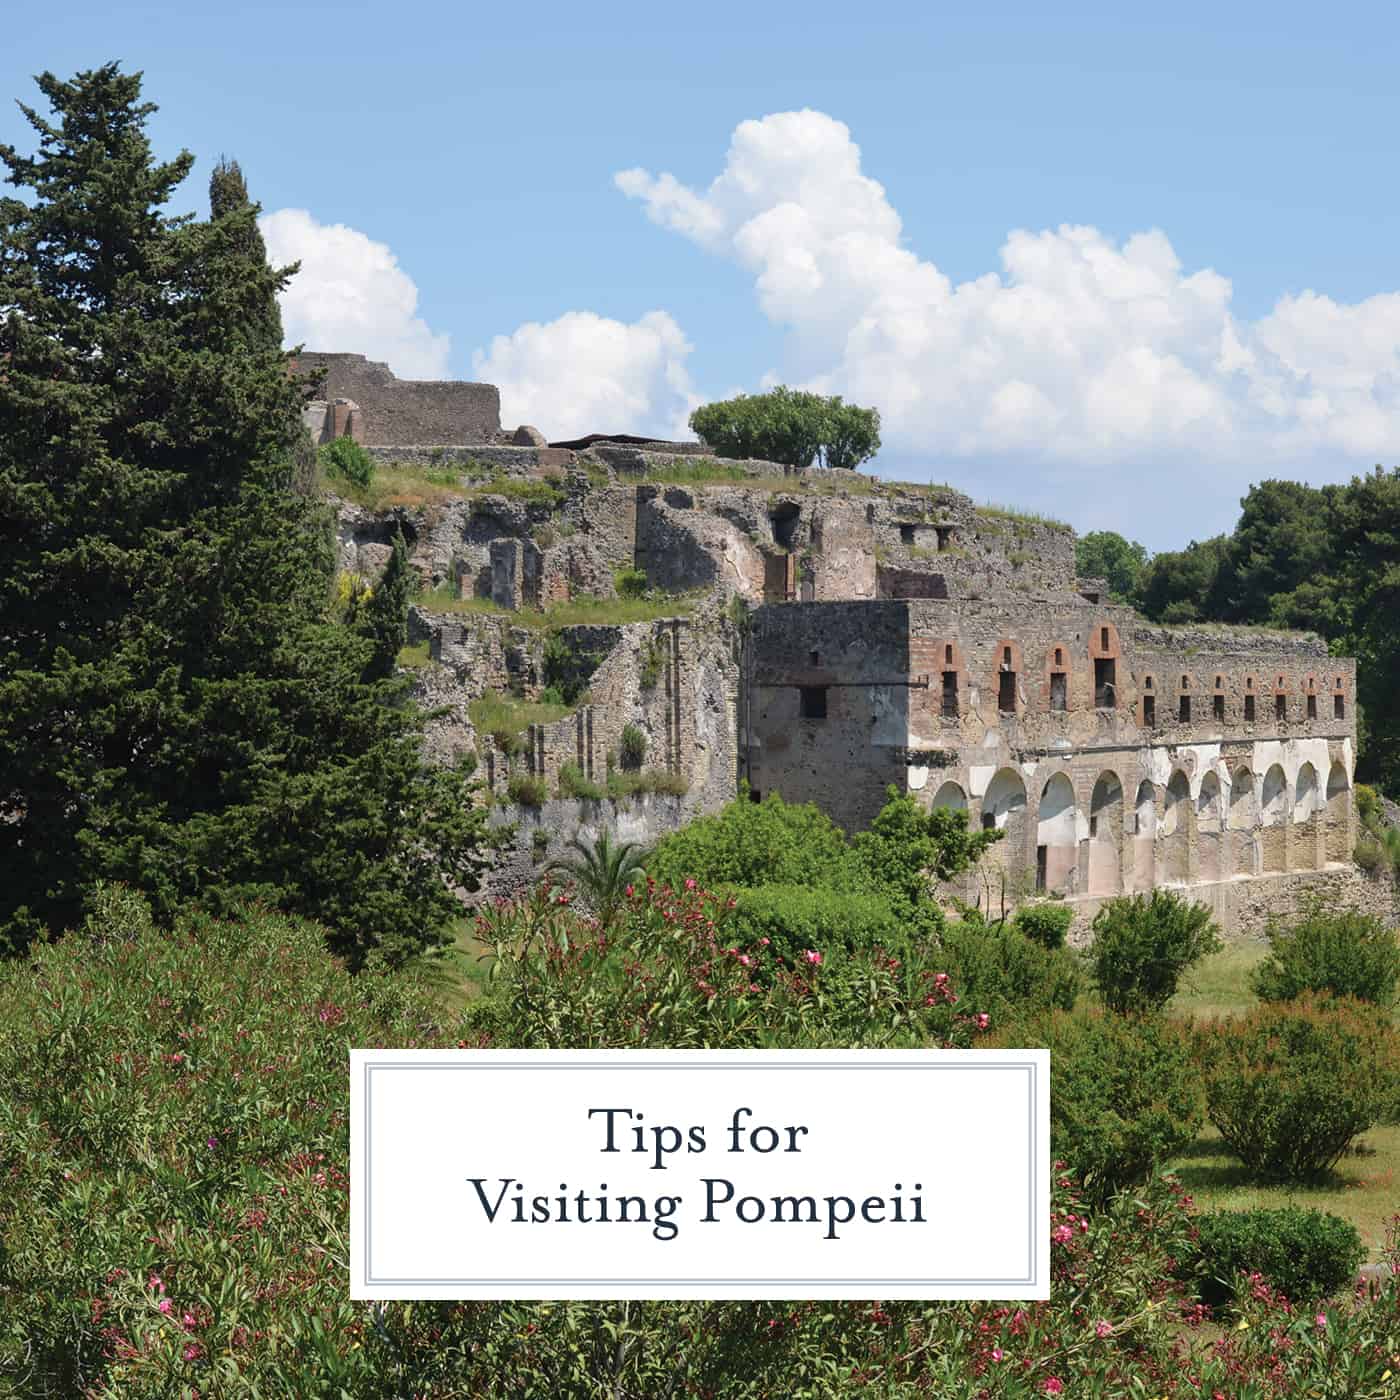 Tips for planning your Visit to Pompeii, the archeological site on the outskirts of Naples at the base of Mount Vesuvius. #pompeii www.savoryexperiments.com